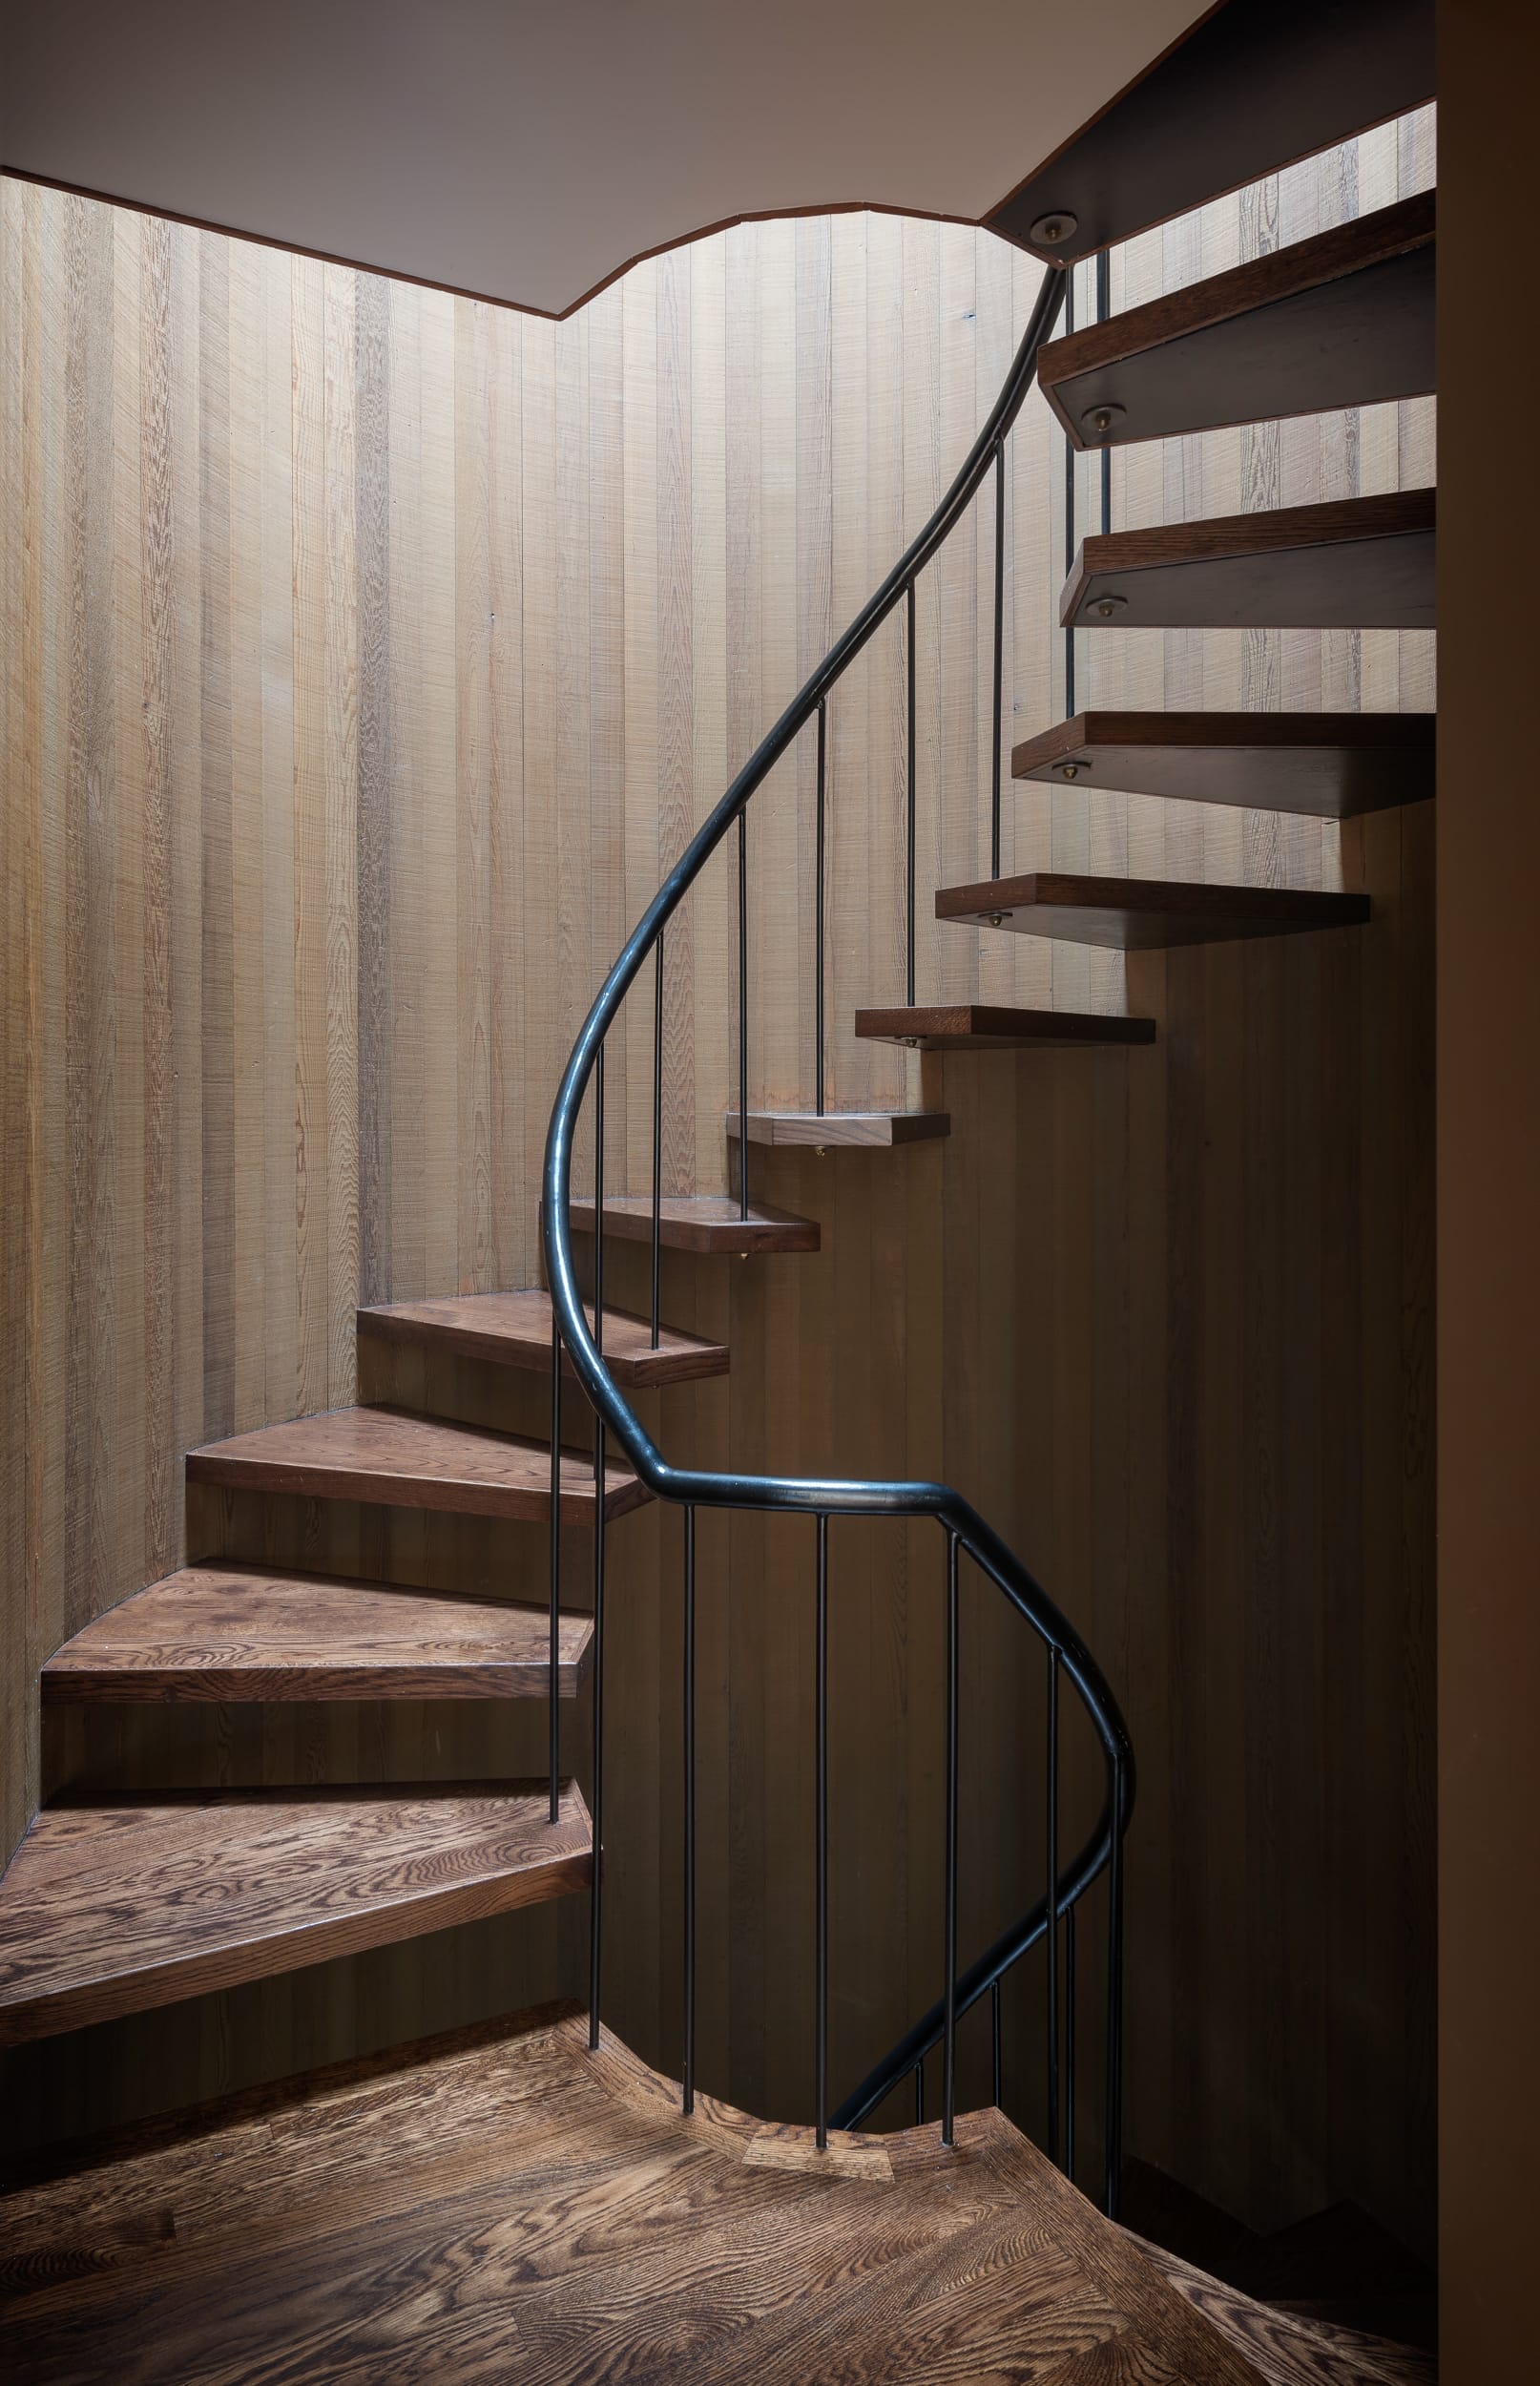 A spiral staircase in a wooden house.